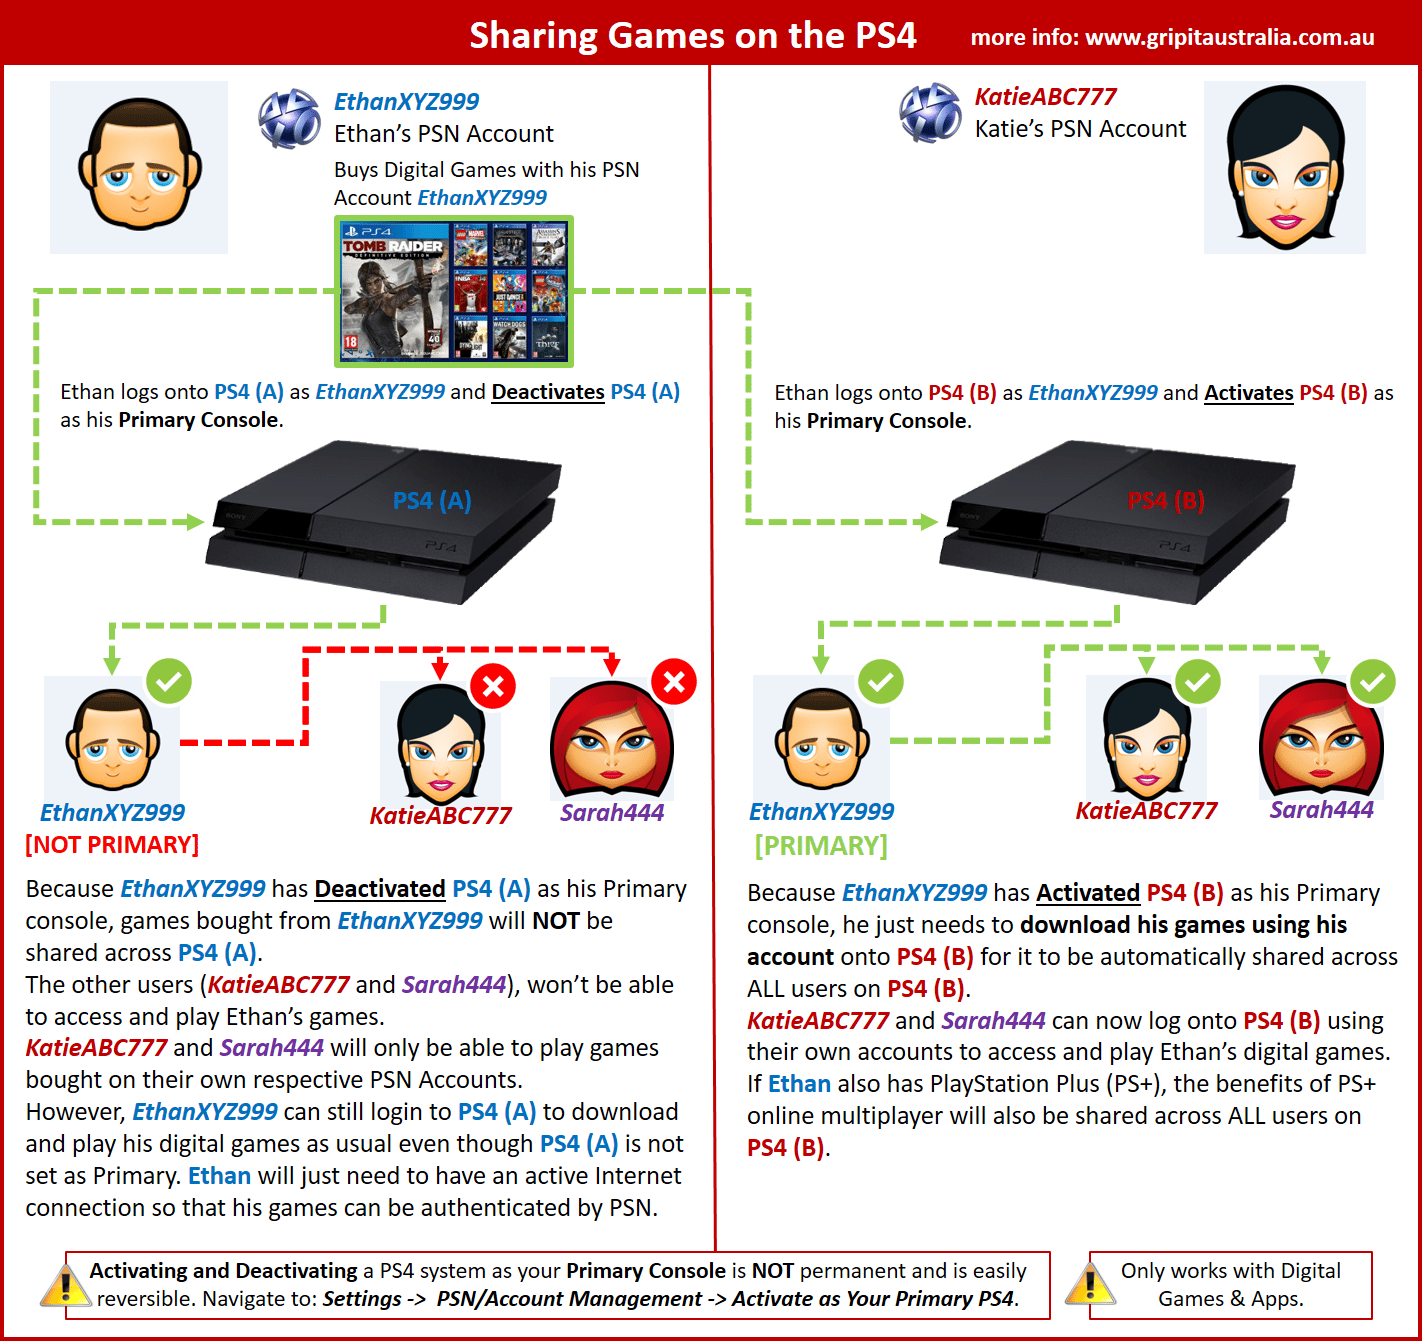 Sharing Games on Your PS4 Using the Primary/Non